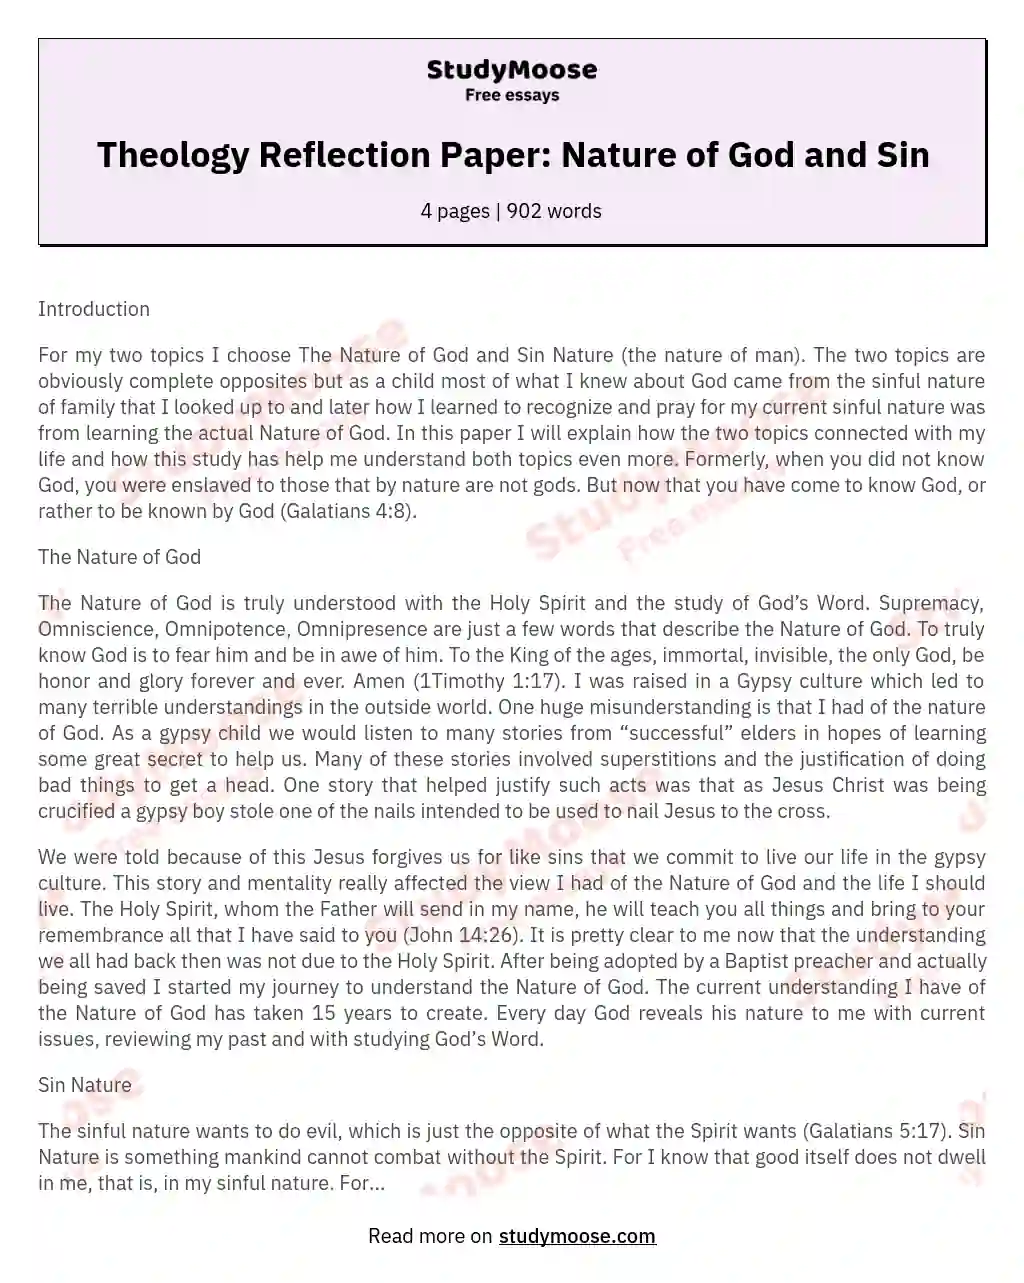 Theology Reflection Paper: Nature of God and Sin